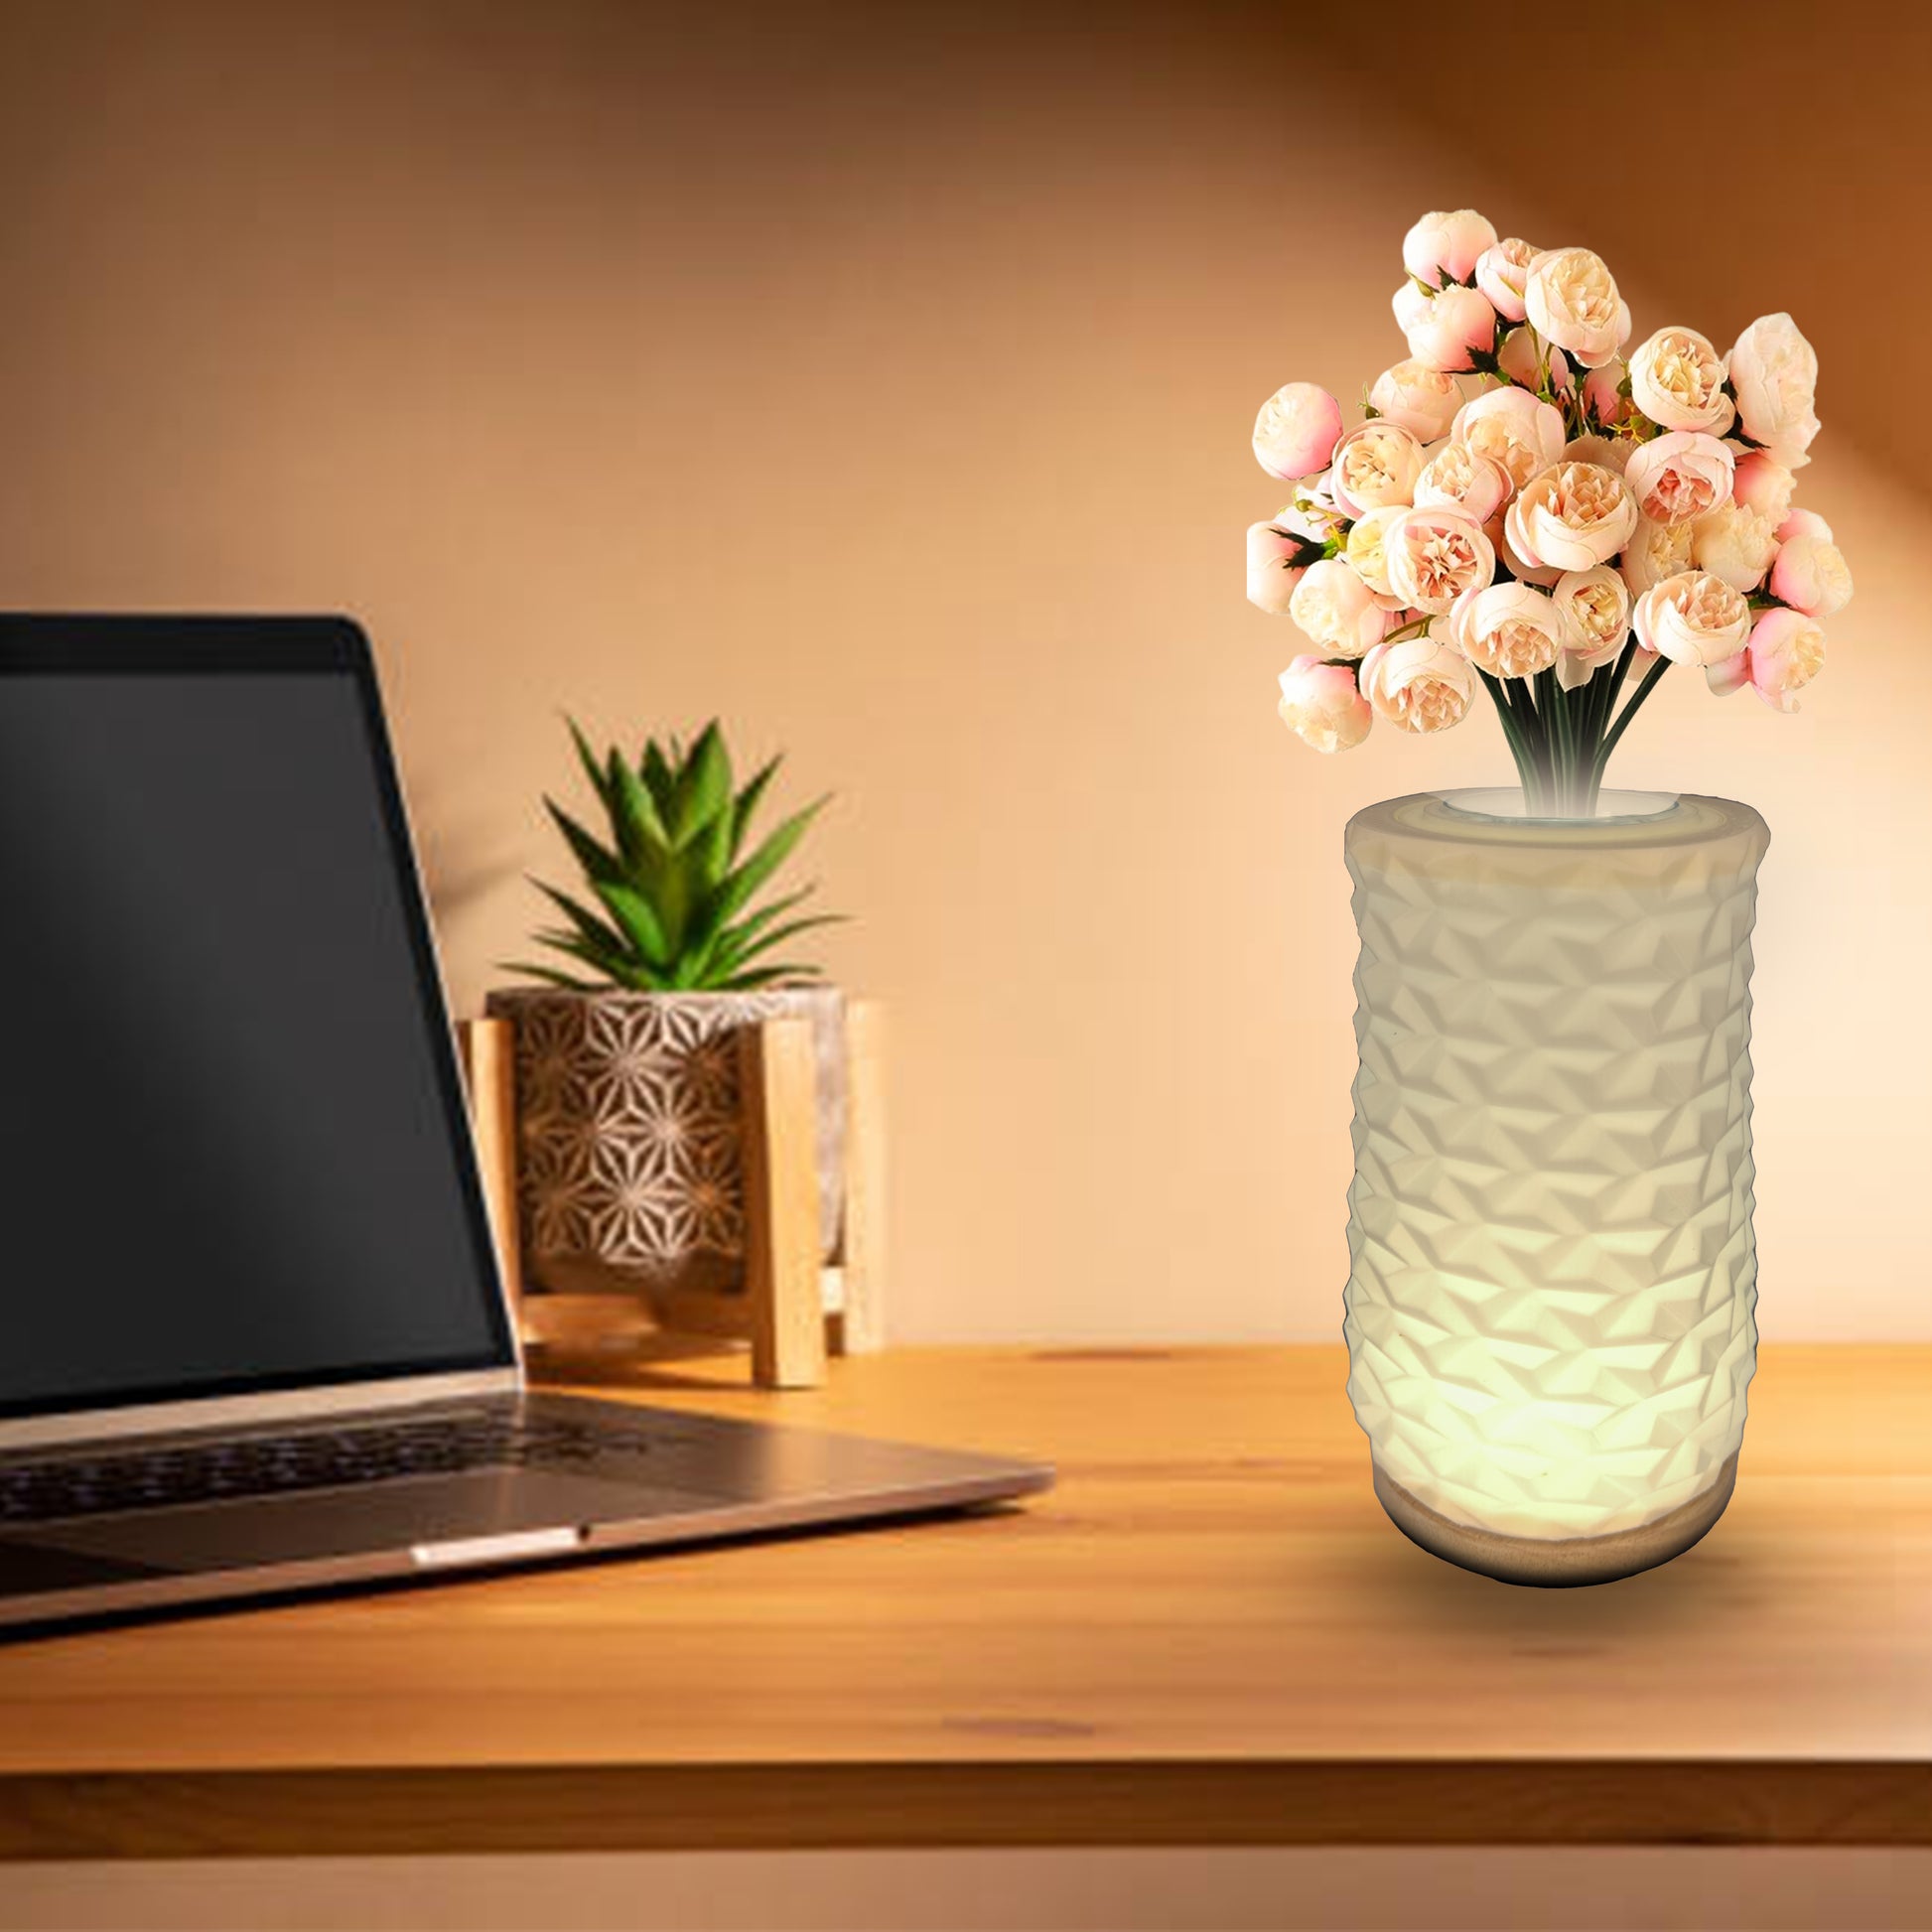 Illuminated Table Vase - 2 in 1 Table Lamp - Flower Vase cum Table Lamp - Crystal Design -Buy Illuminated Table Vase - 2 in 1 Table Lamp - Flower Vase cum Table Lamp - Crystal Design in Dubai - HOCC Dubai - Baby playground outdoor - Shop baby product - Sh